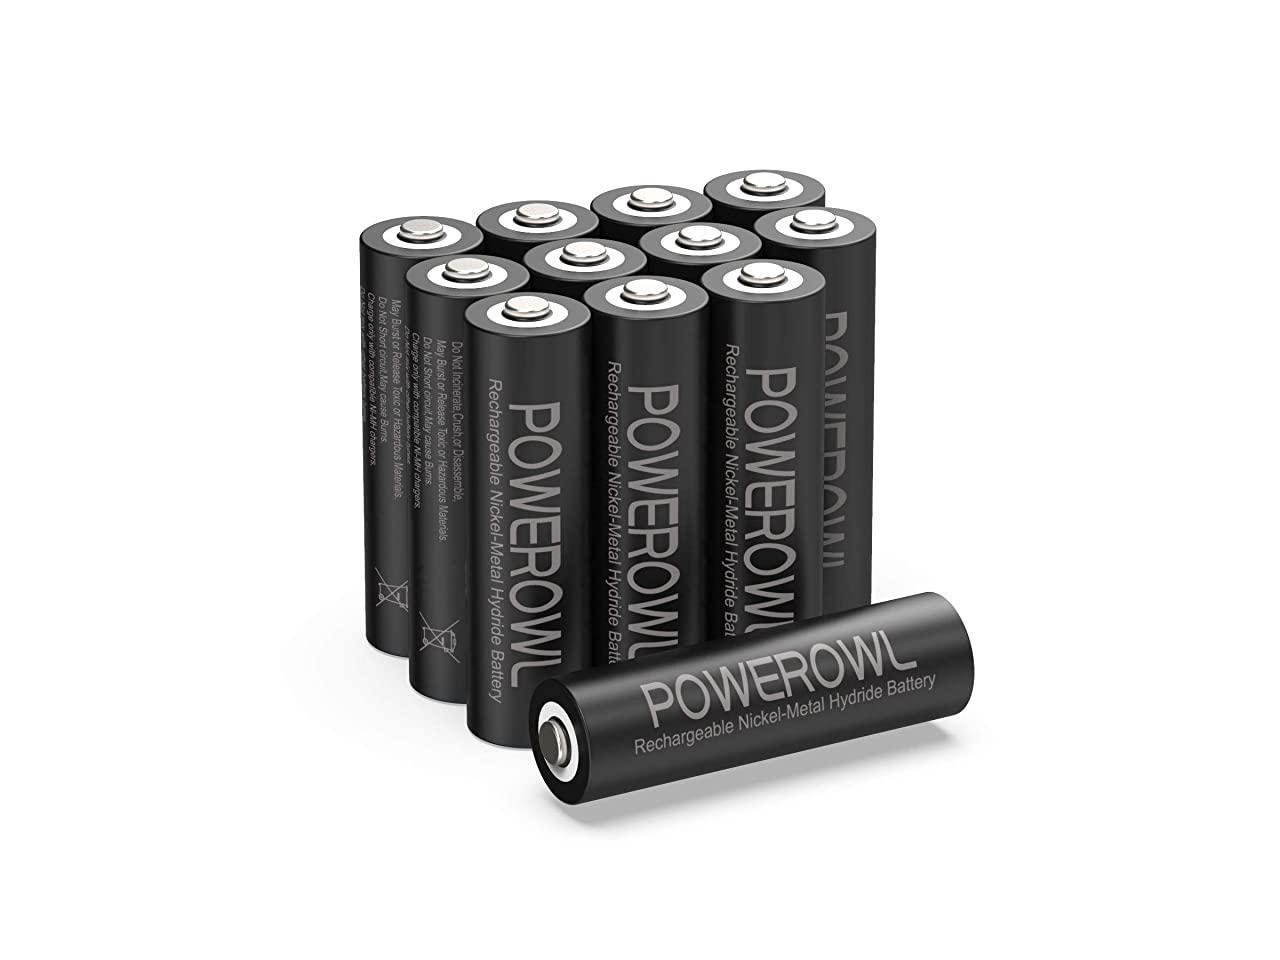 Rechargeable AA Batteries 2800mAh Wide Temperature Range Battery Excellent Performance for Solar Garden Lights Battery String Lights Outdoor Devices Recharge 12 Count - Newegg.com